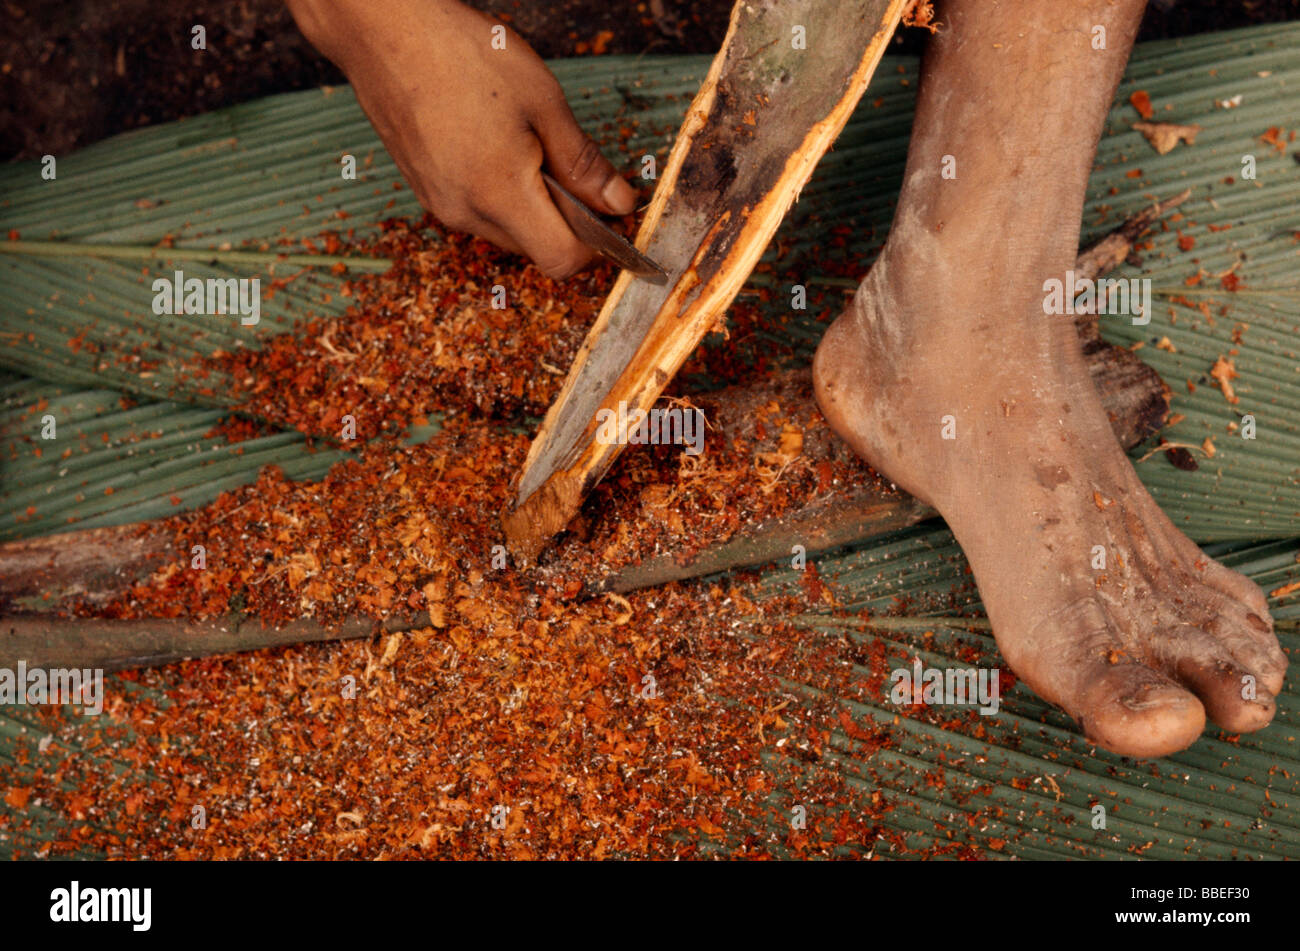 ECUADOR South America Amazon Jungle Auca Curare process for making poison darts used by the Waorani peoples. Stock Photo